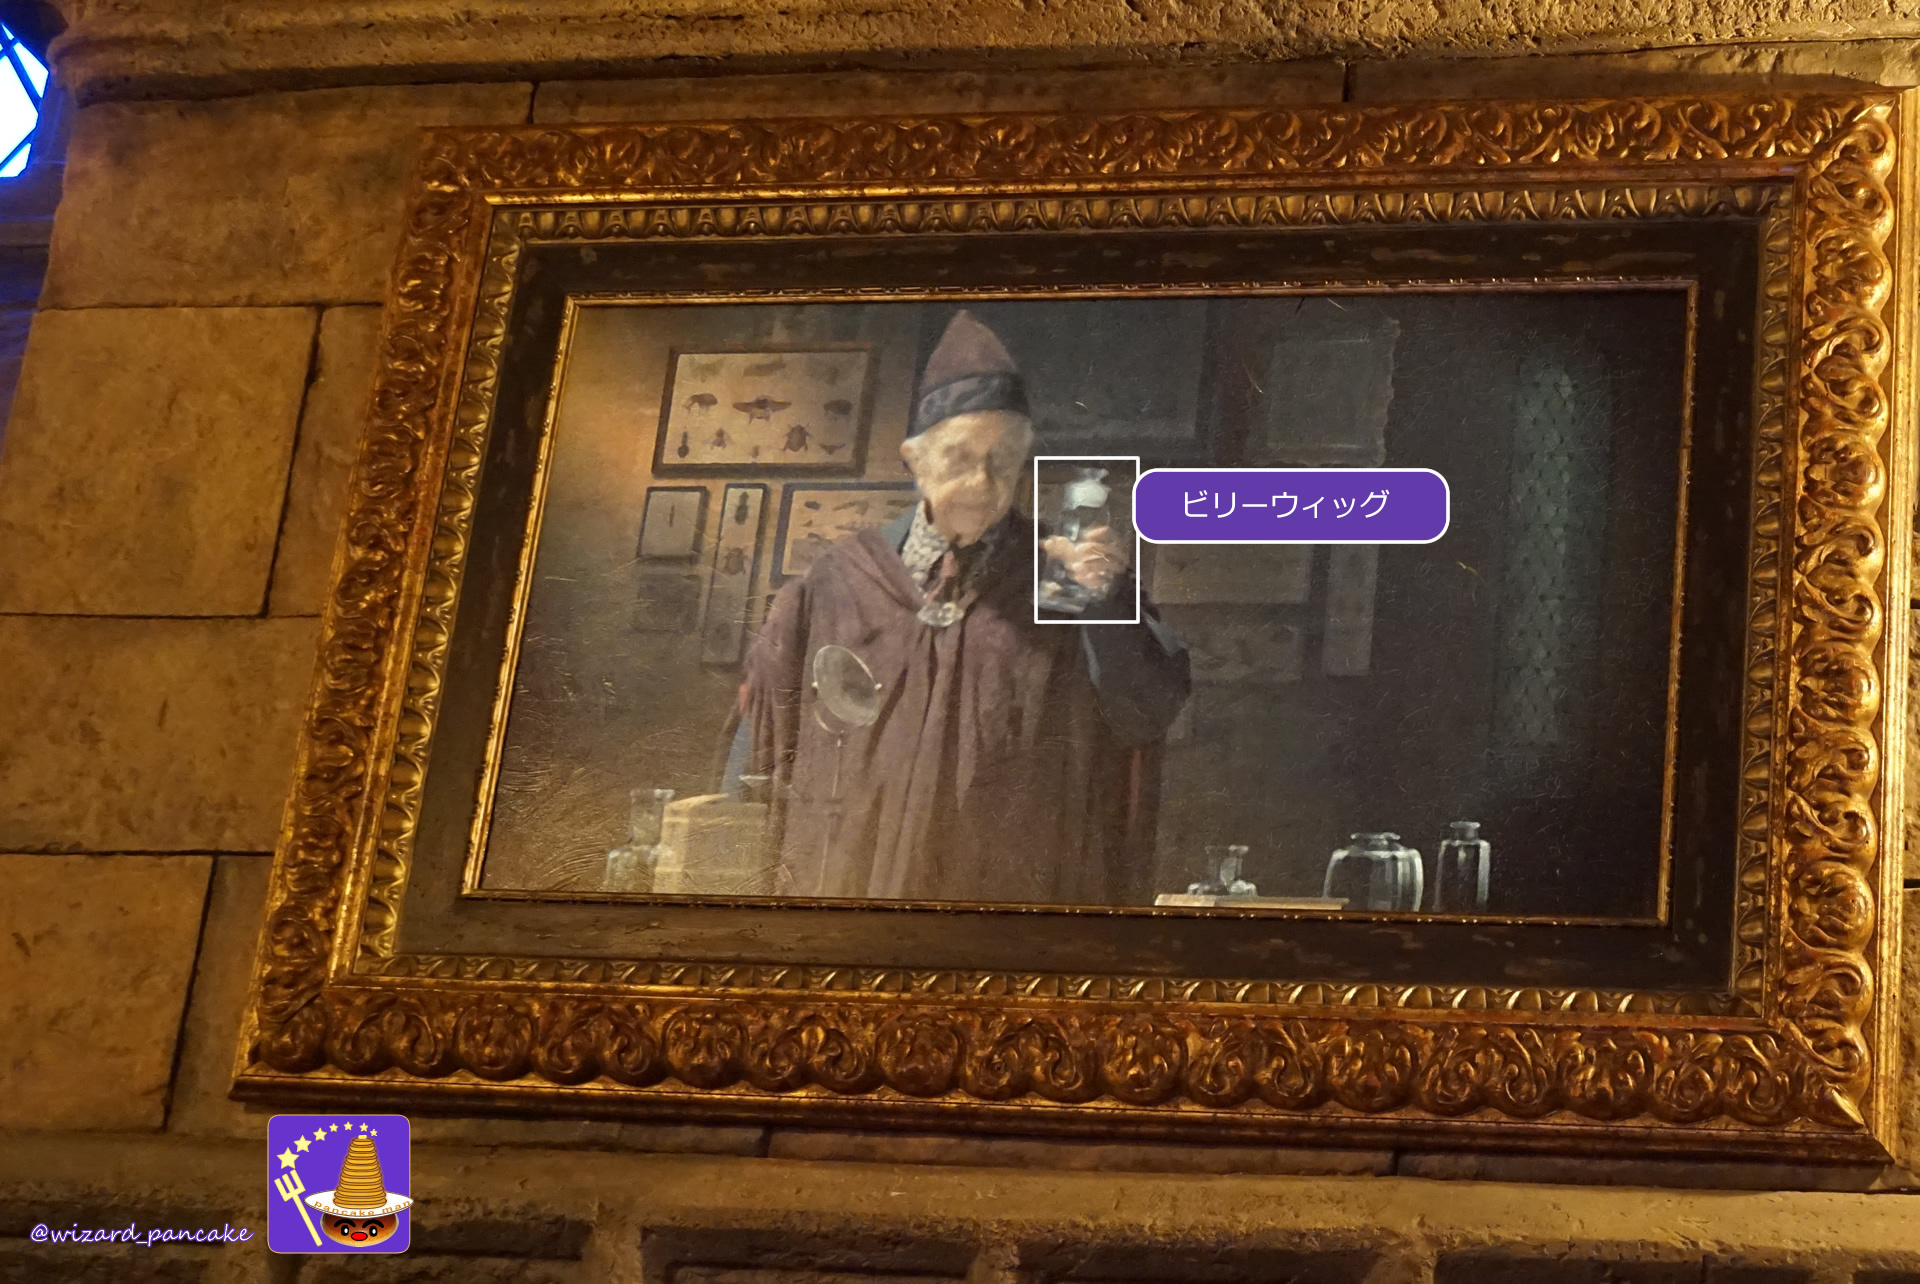 The magical creature Billy Wig from Fantaboby is at Hogwarts Castle! Hogwarts Castle Walk (USJ 'Harry Potter Area')